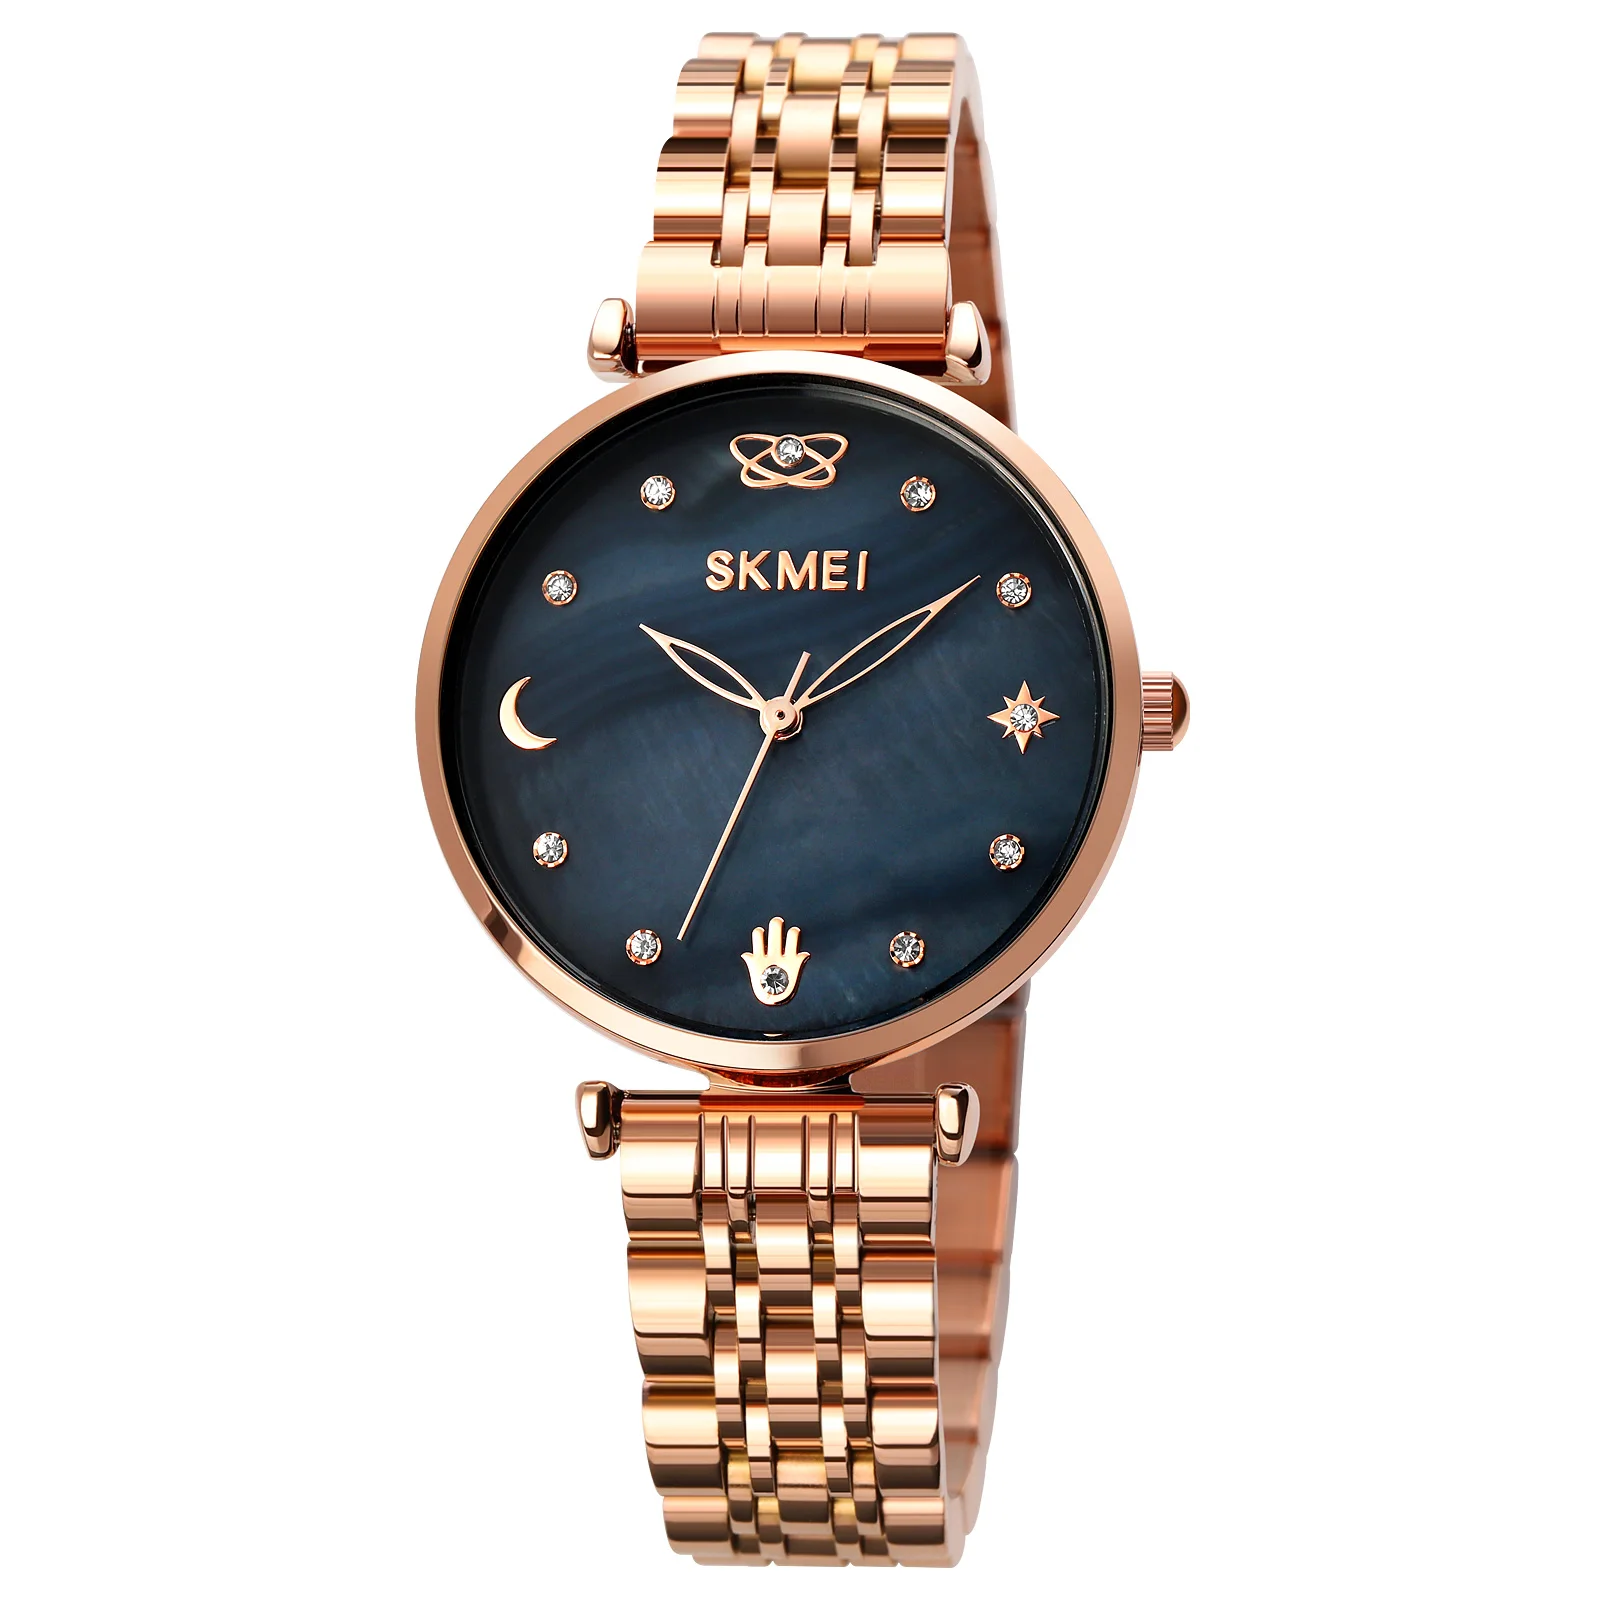 

oem supply private label watch skmei 1800 new design moon star hand on dial women luxury quartz wrist watches, Black, silver, rose gold, oem